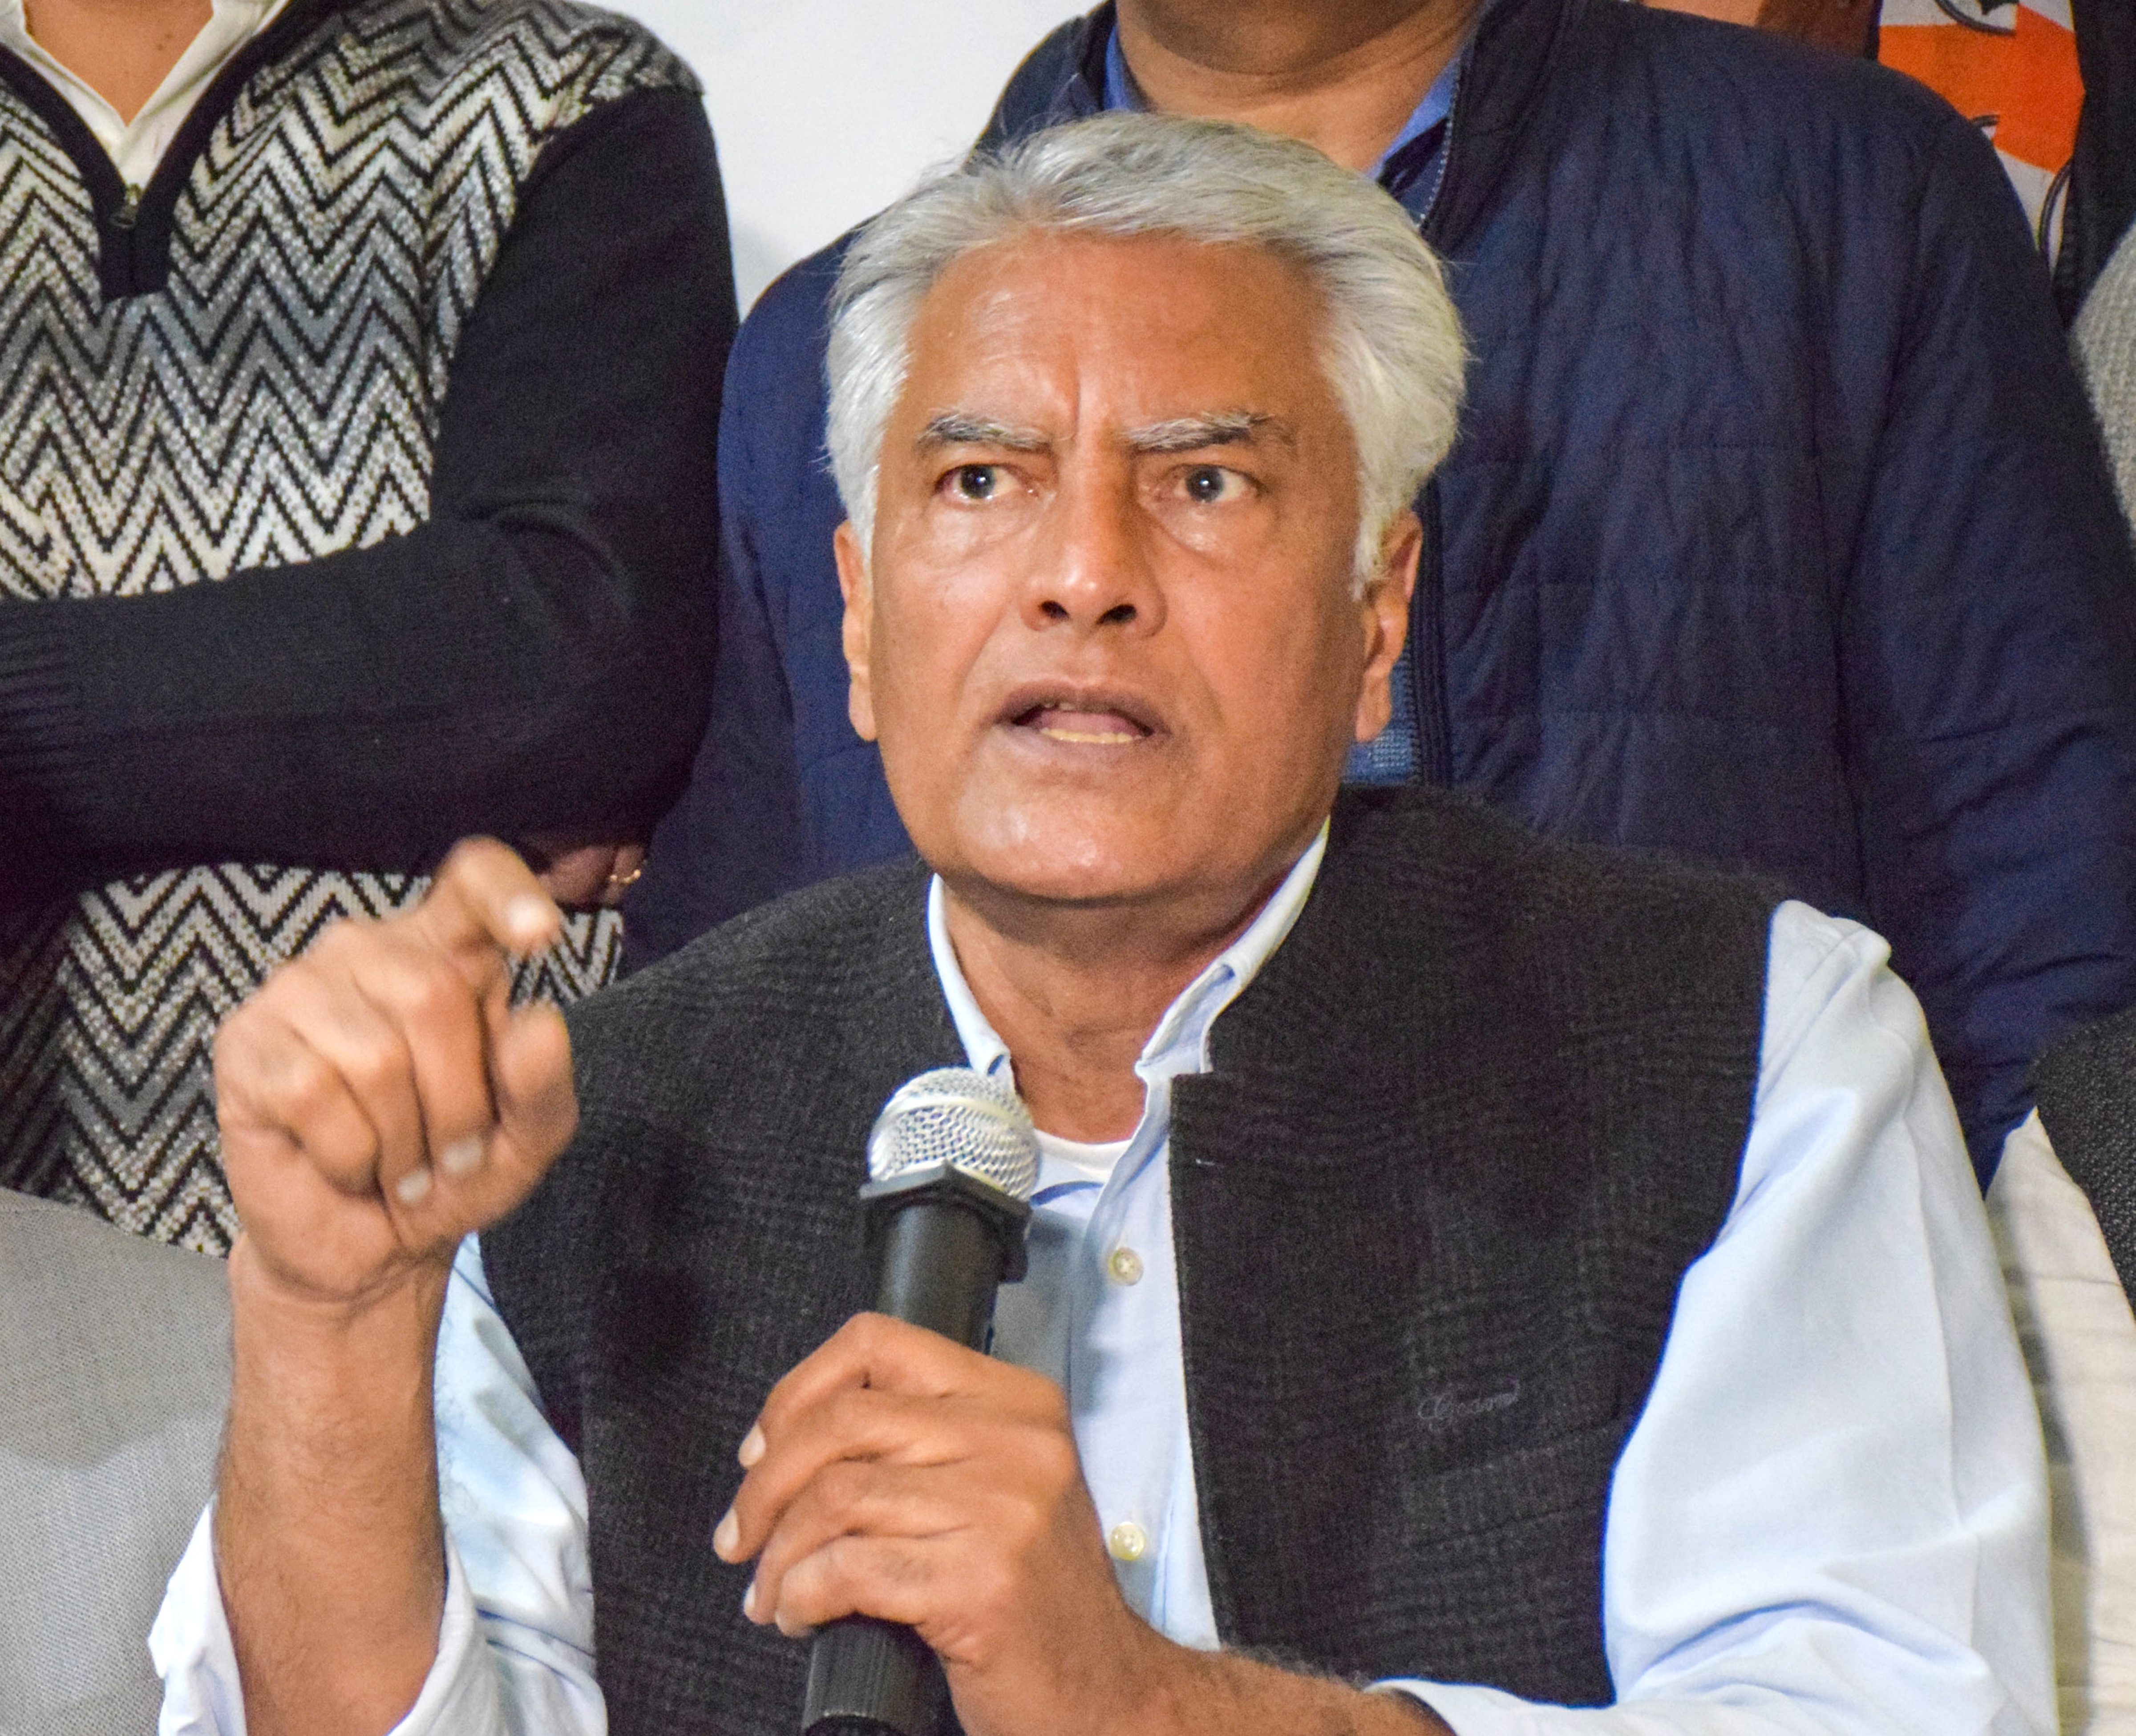 Sunil Jakhar started working for BJP long before, playing blatant Hindutva politics: Punjab Cong chief Warring